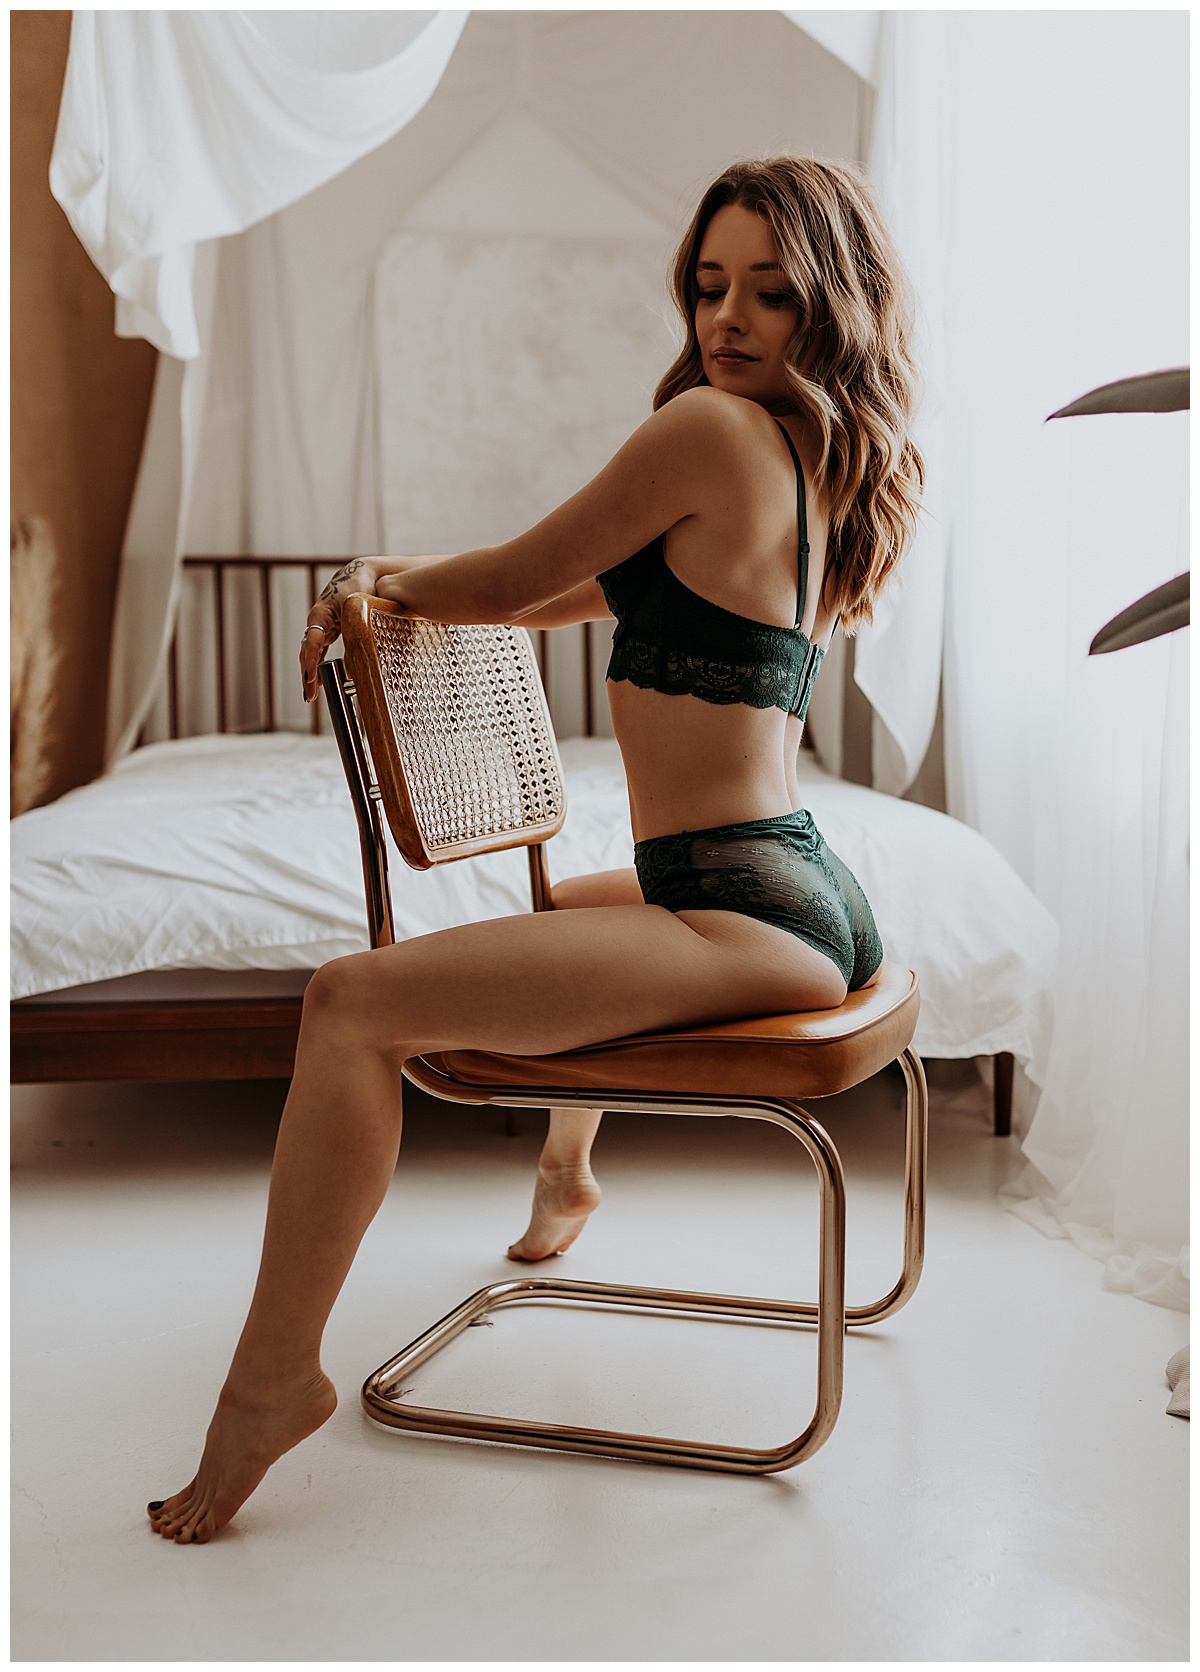 Brunette sits on chair embracing warm sunset glow vibes in green lingerie 